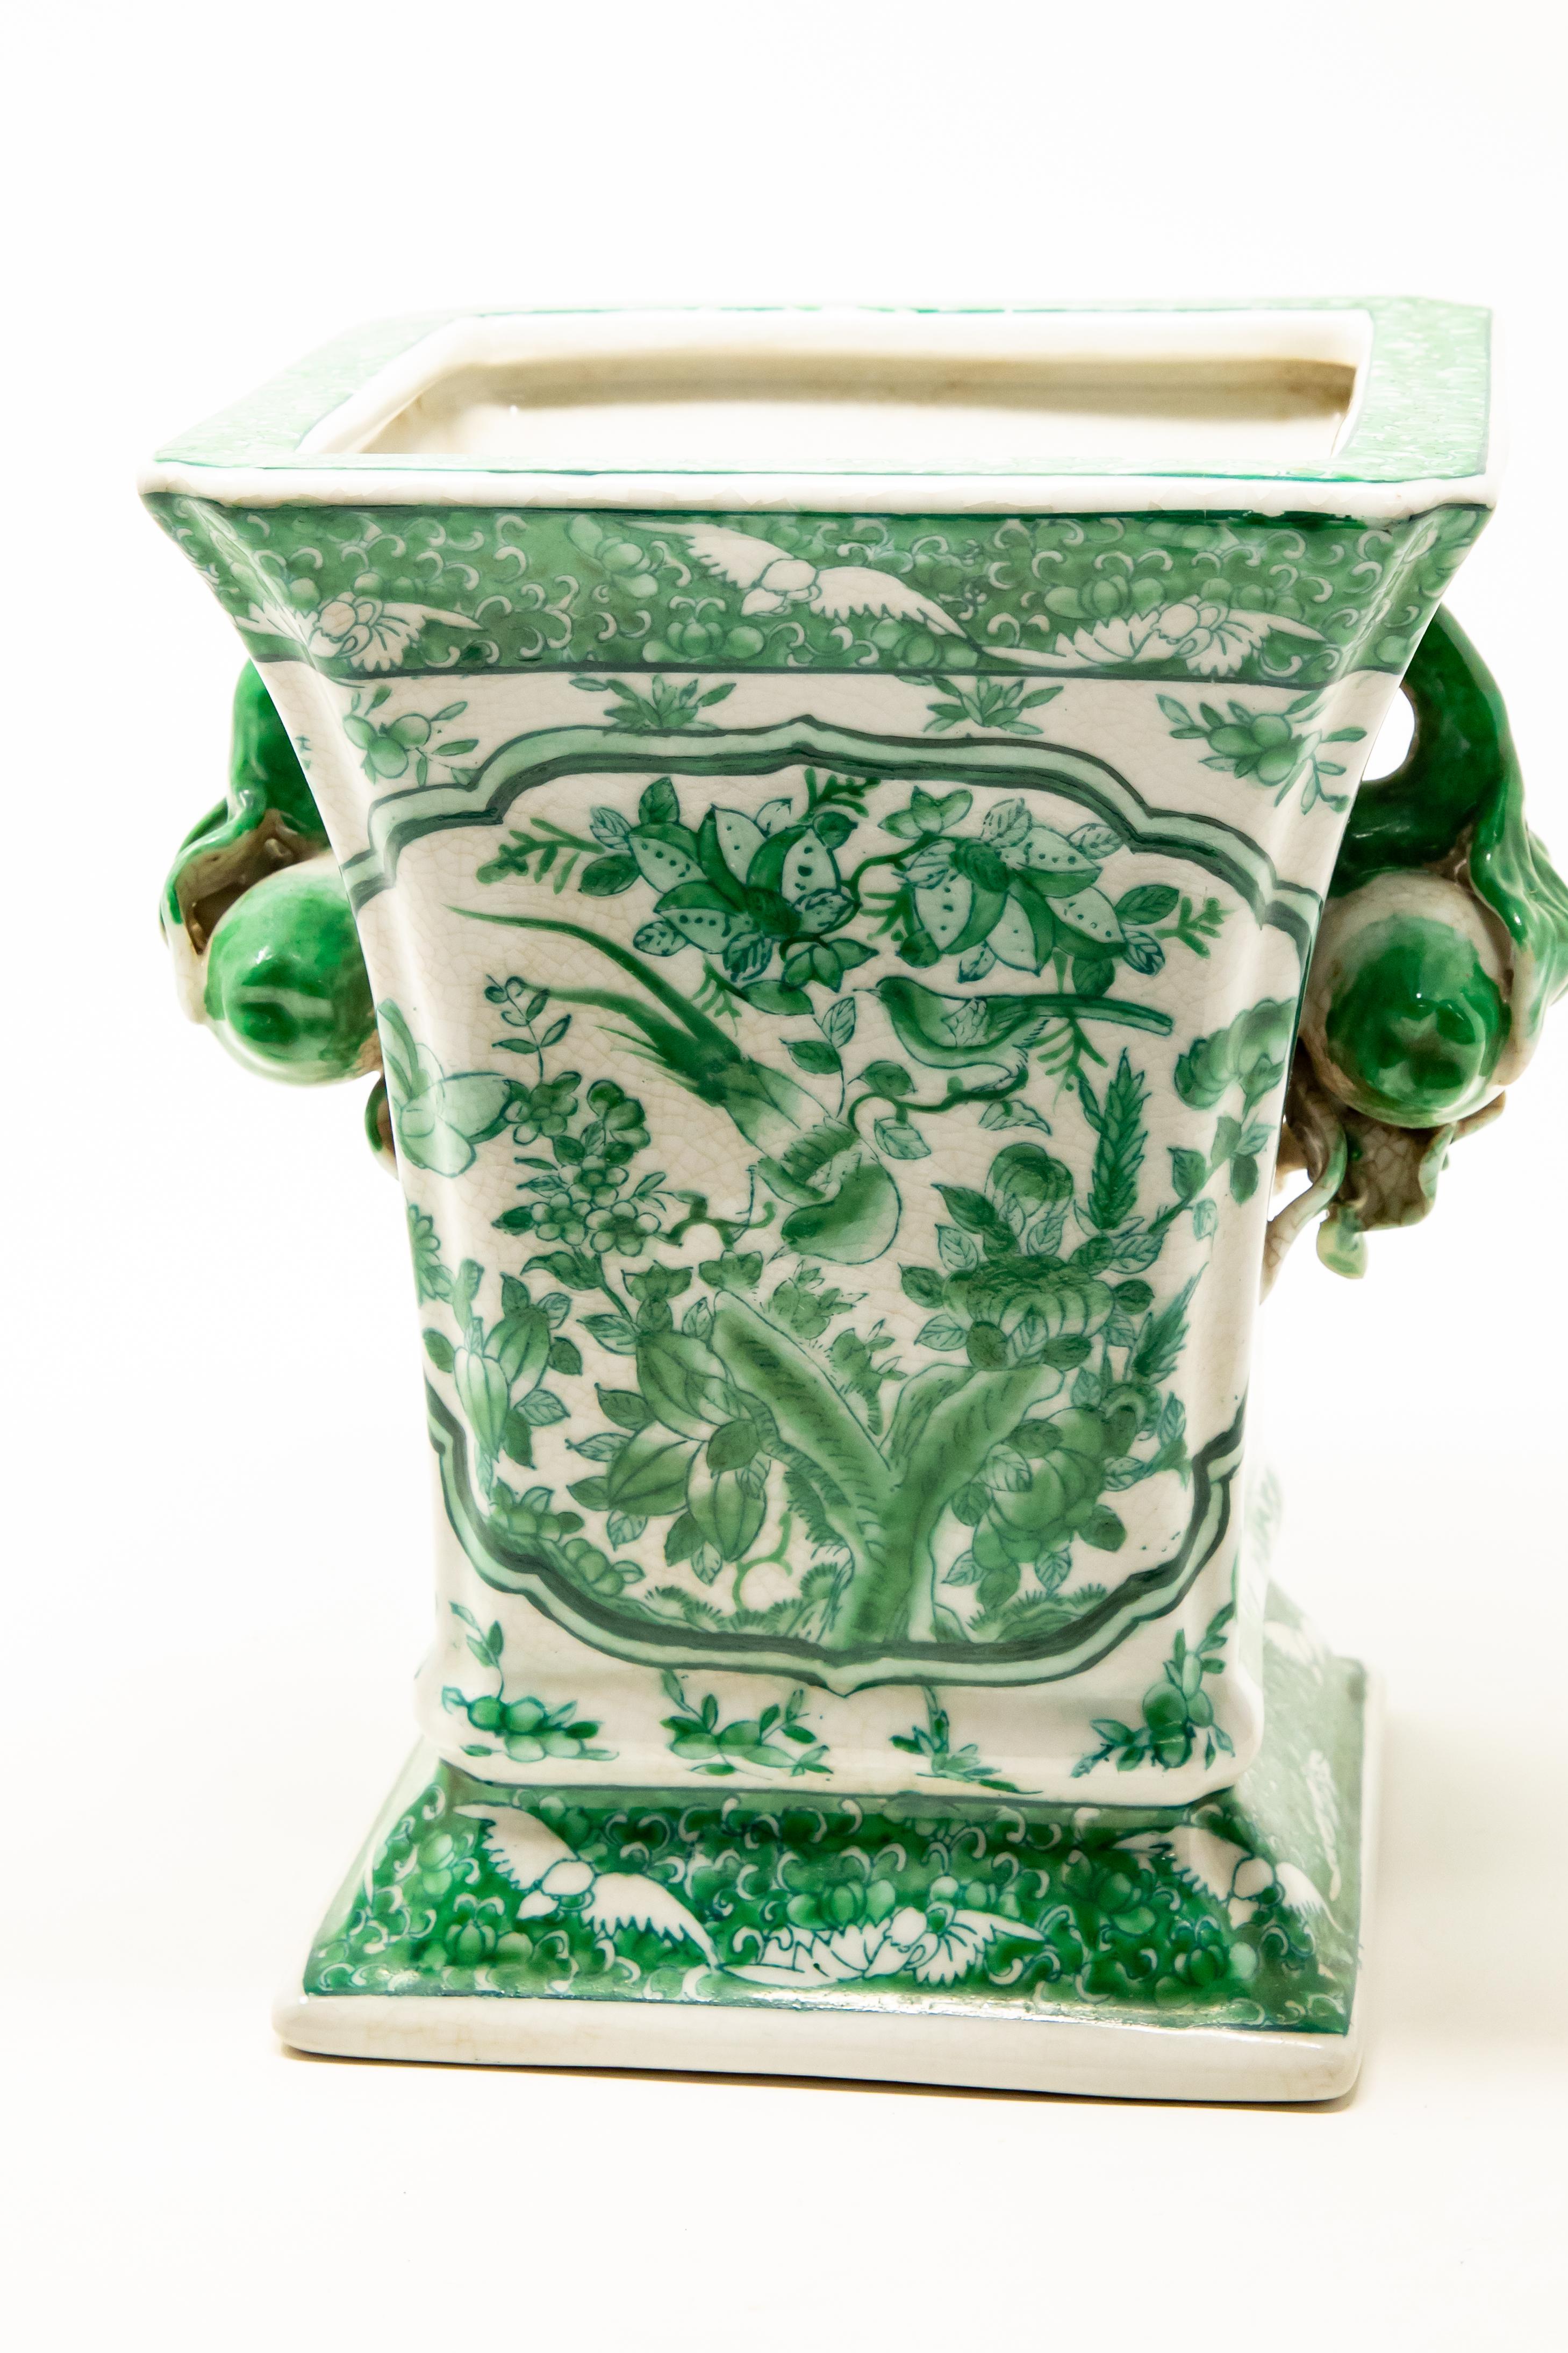 Offering this green and white vase. Hand painted in green with floral and foliate detail. The vase is square in shape and has two handles that are fruit themed.